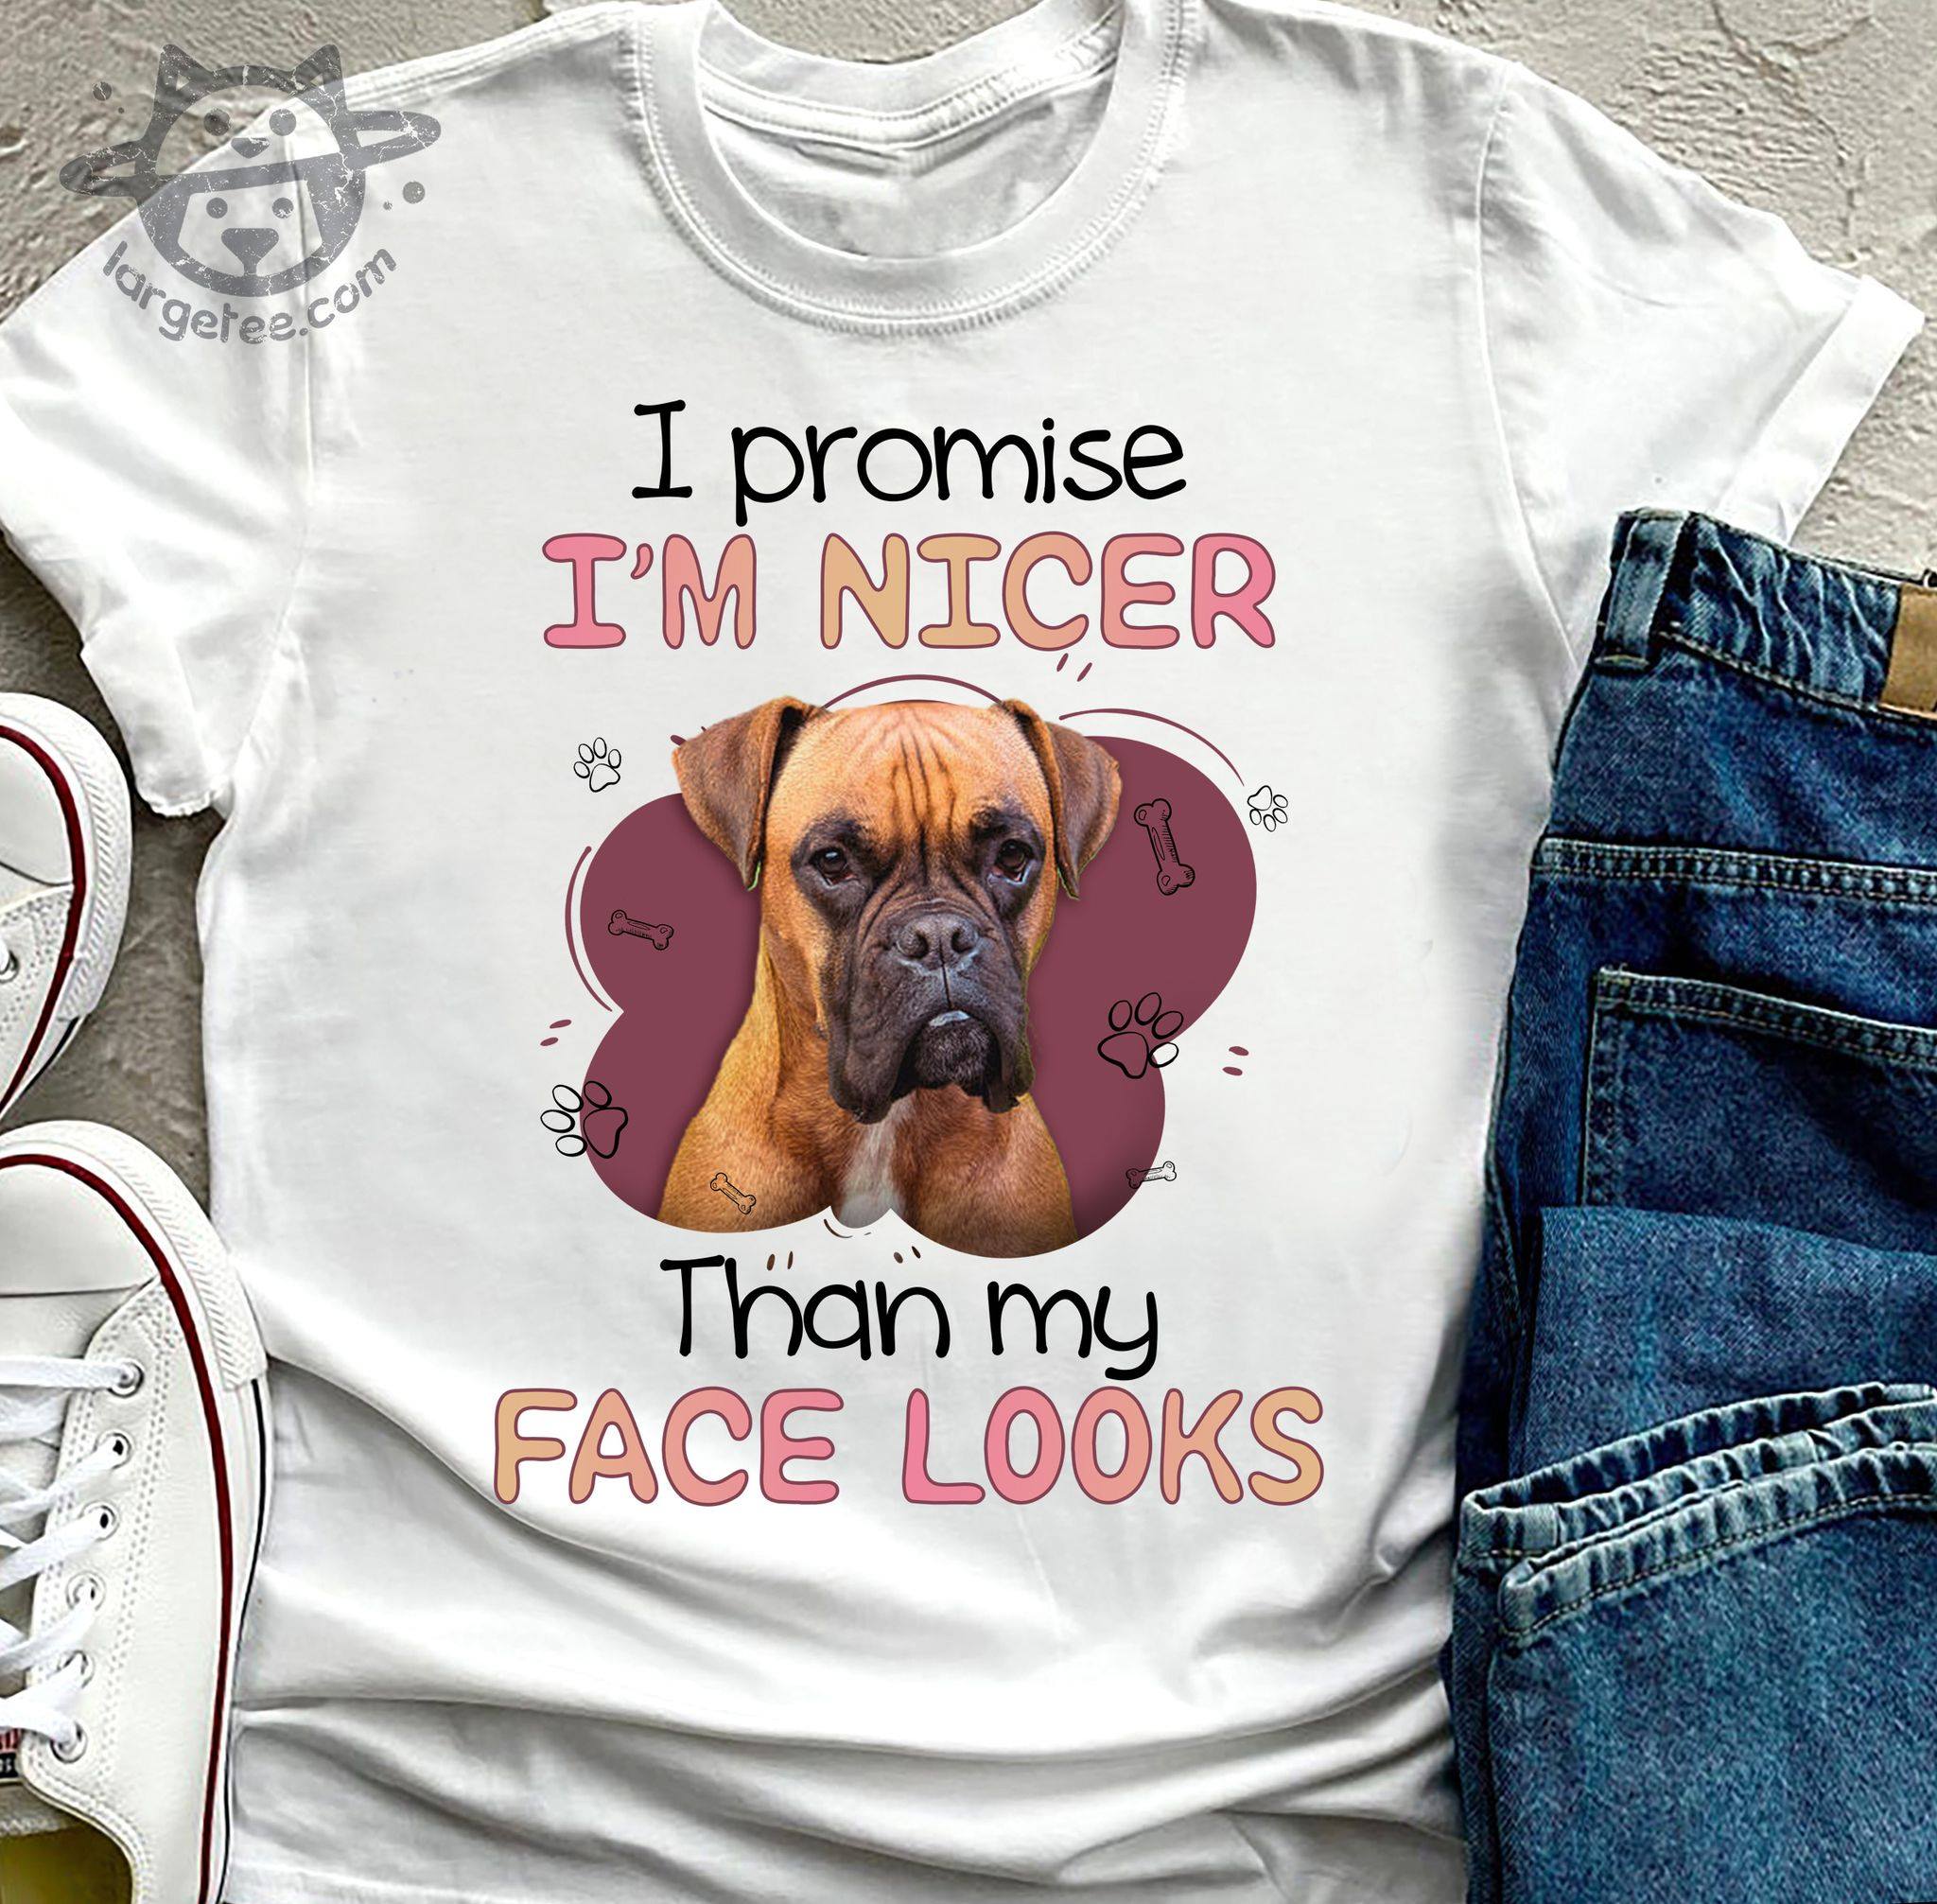 I promise I'm nicer than my face looks - Boxer breed dog